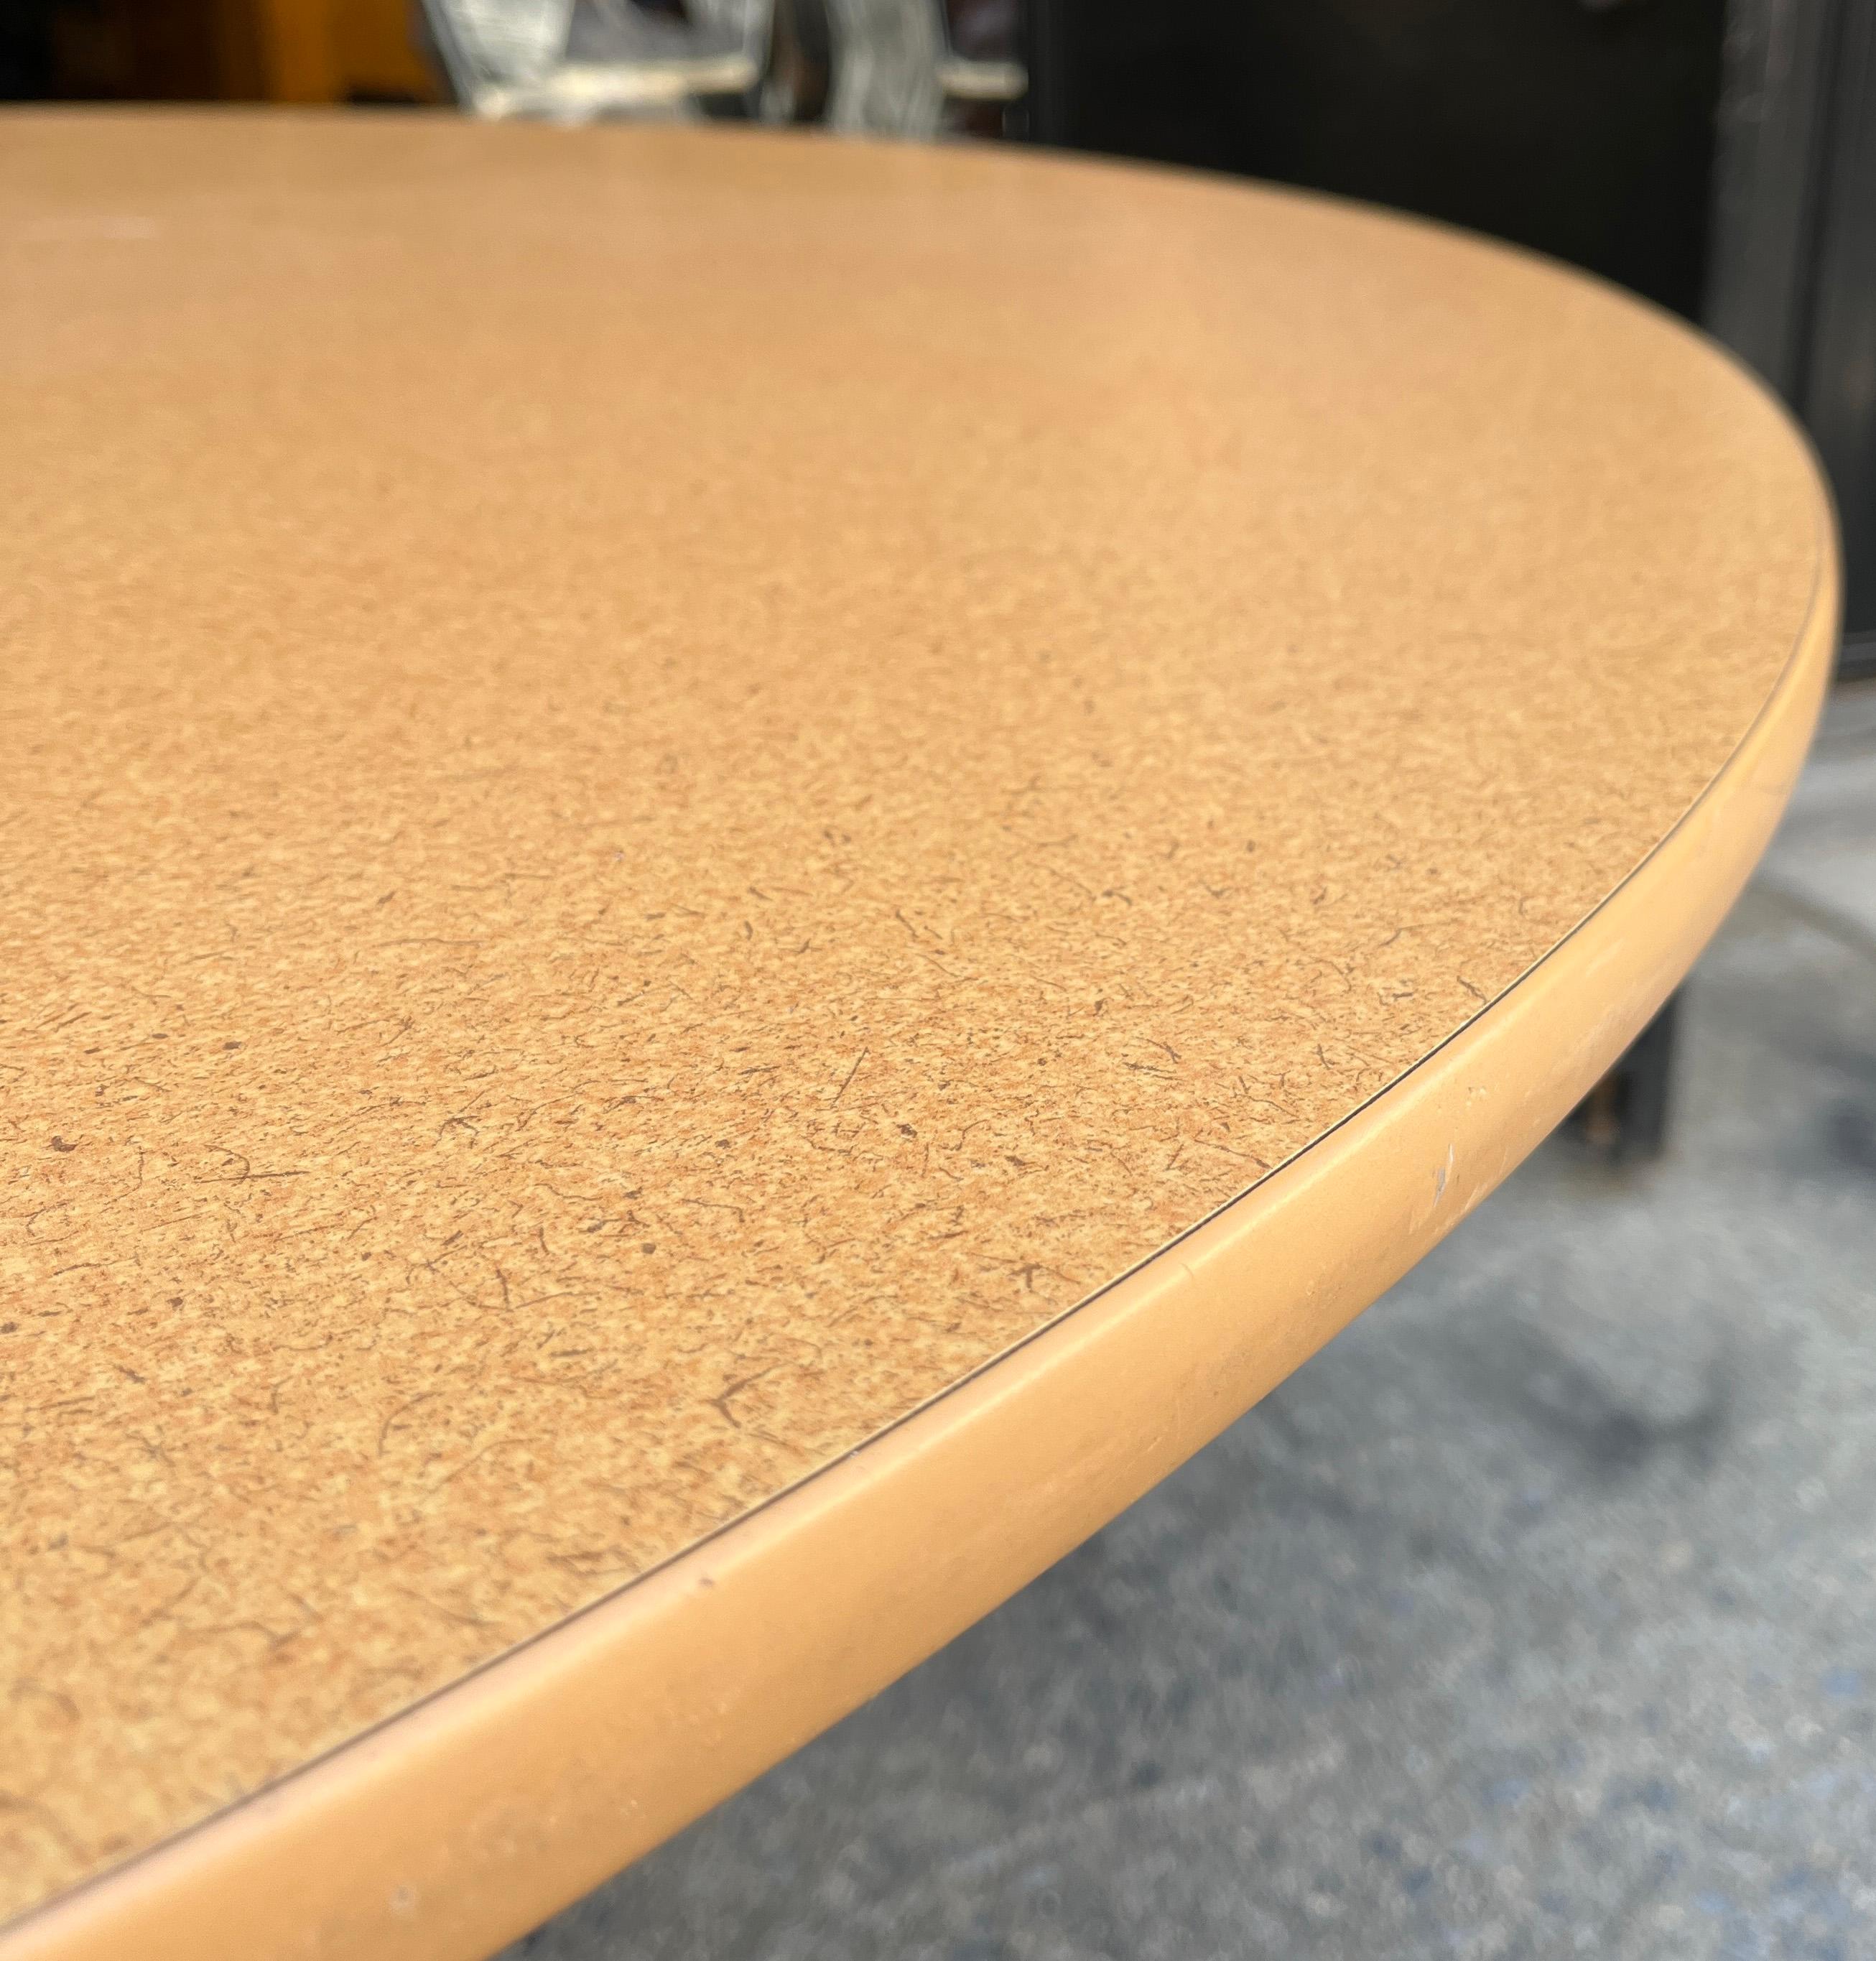 A post modern take on a classic design. Eames Aluminum group dining or conference table with an 80's take. Stunning cork laminate top with almond edge banding makes this table very durable. Single tone aluminum colored base with foot glides that